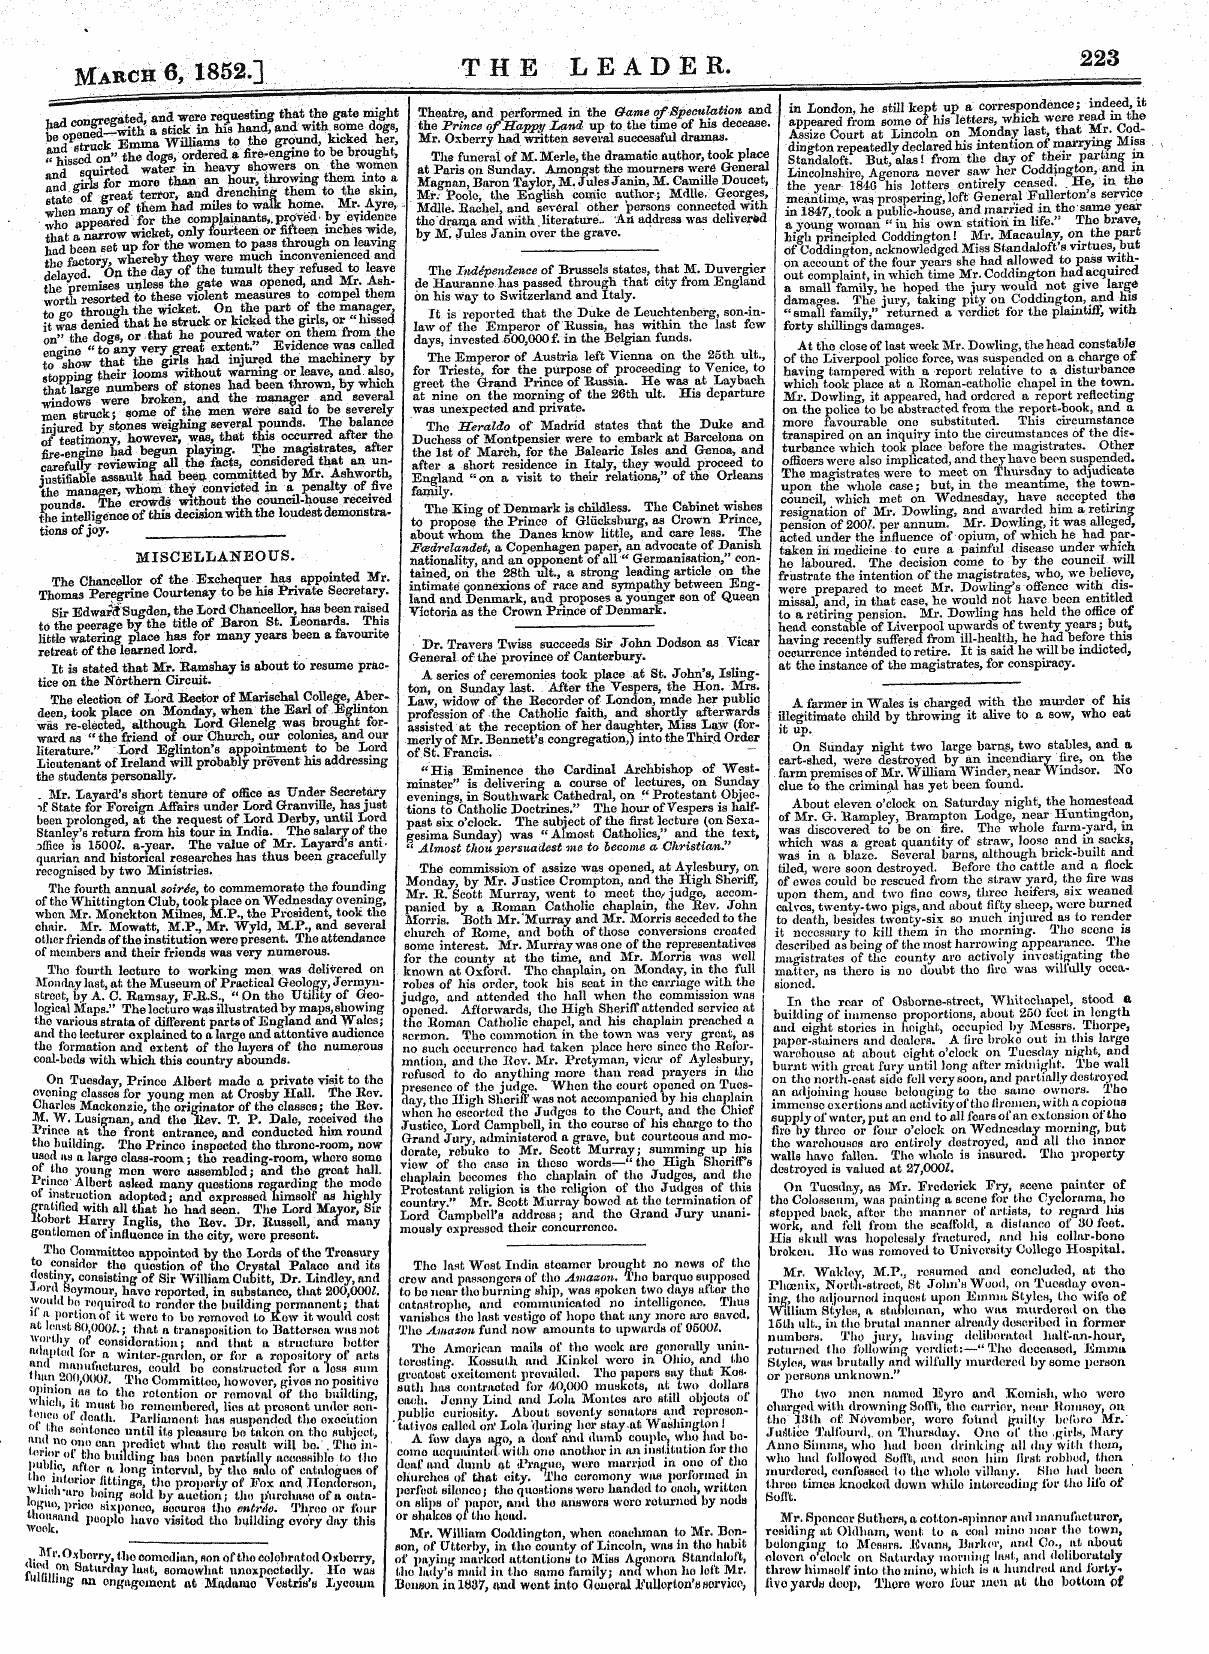 Leader (1850-1860): jS F Y, Country edition - March 6, 1852.] The Leader. 223